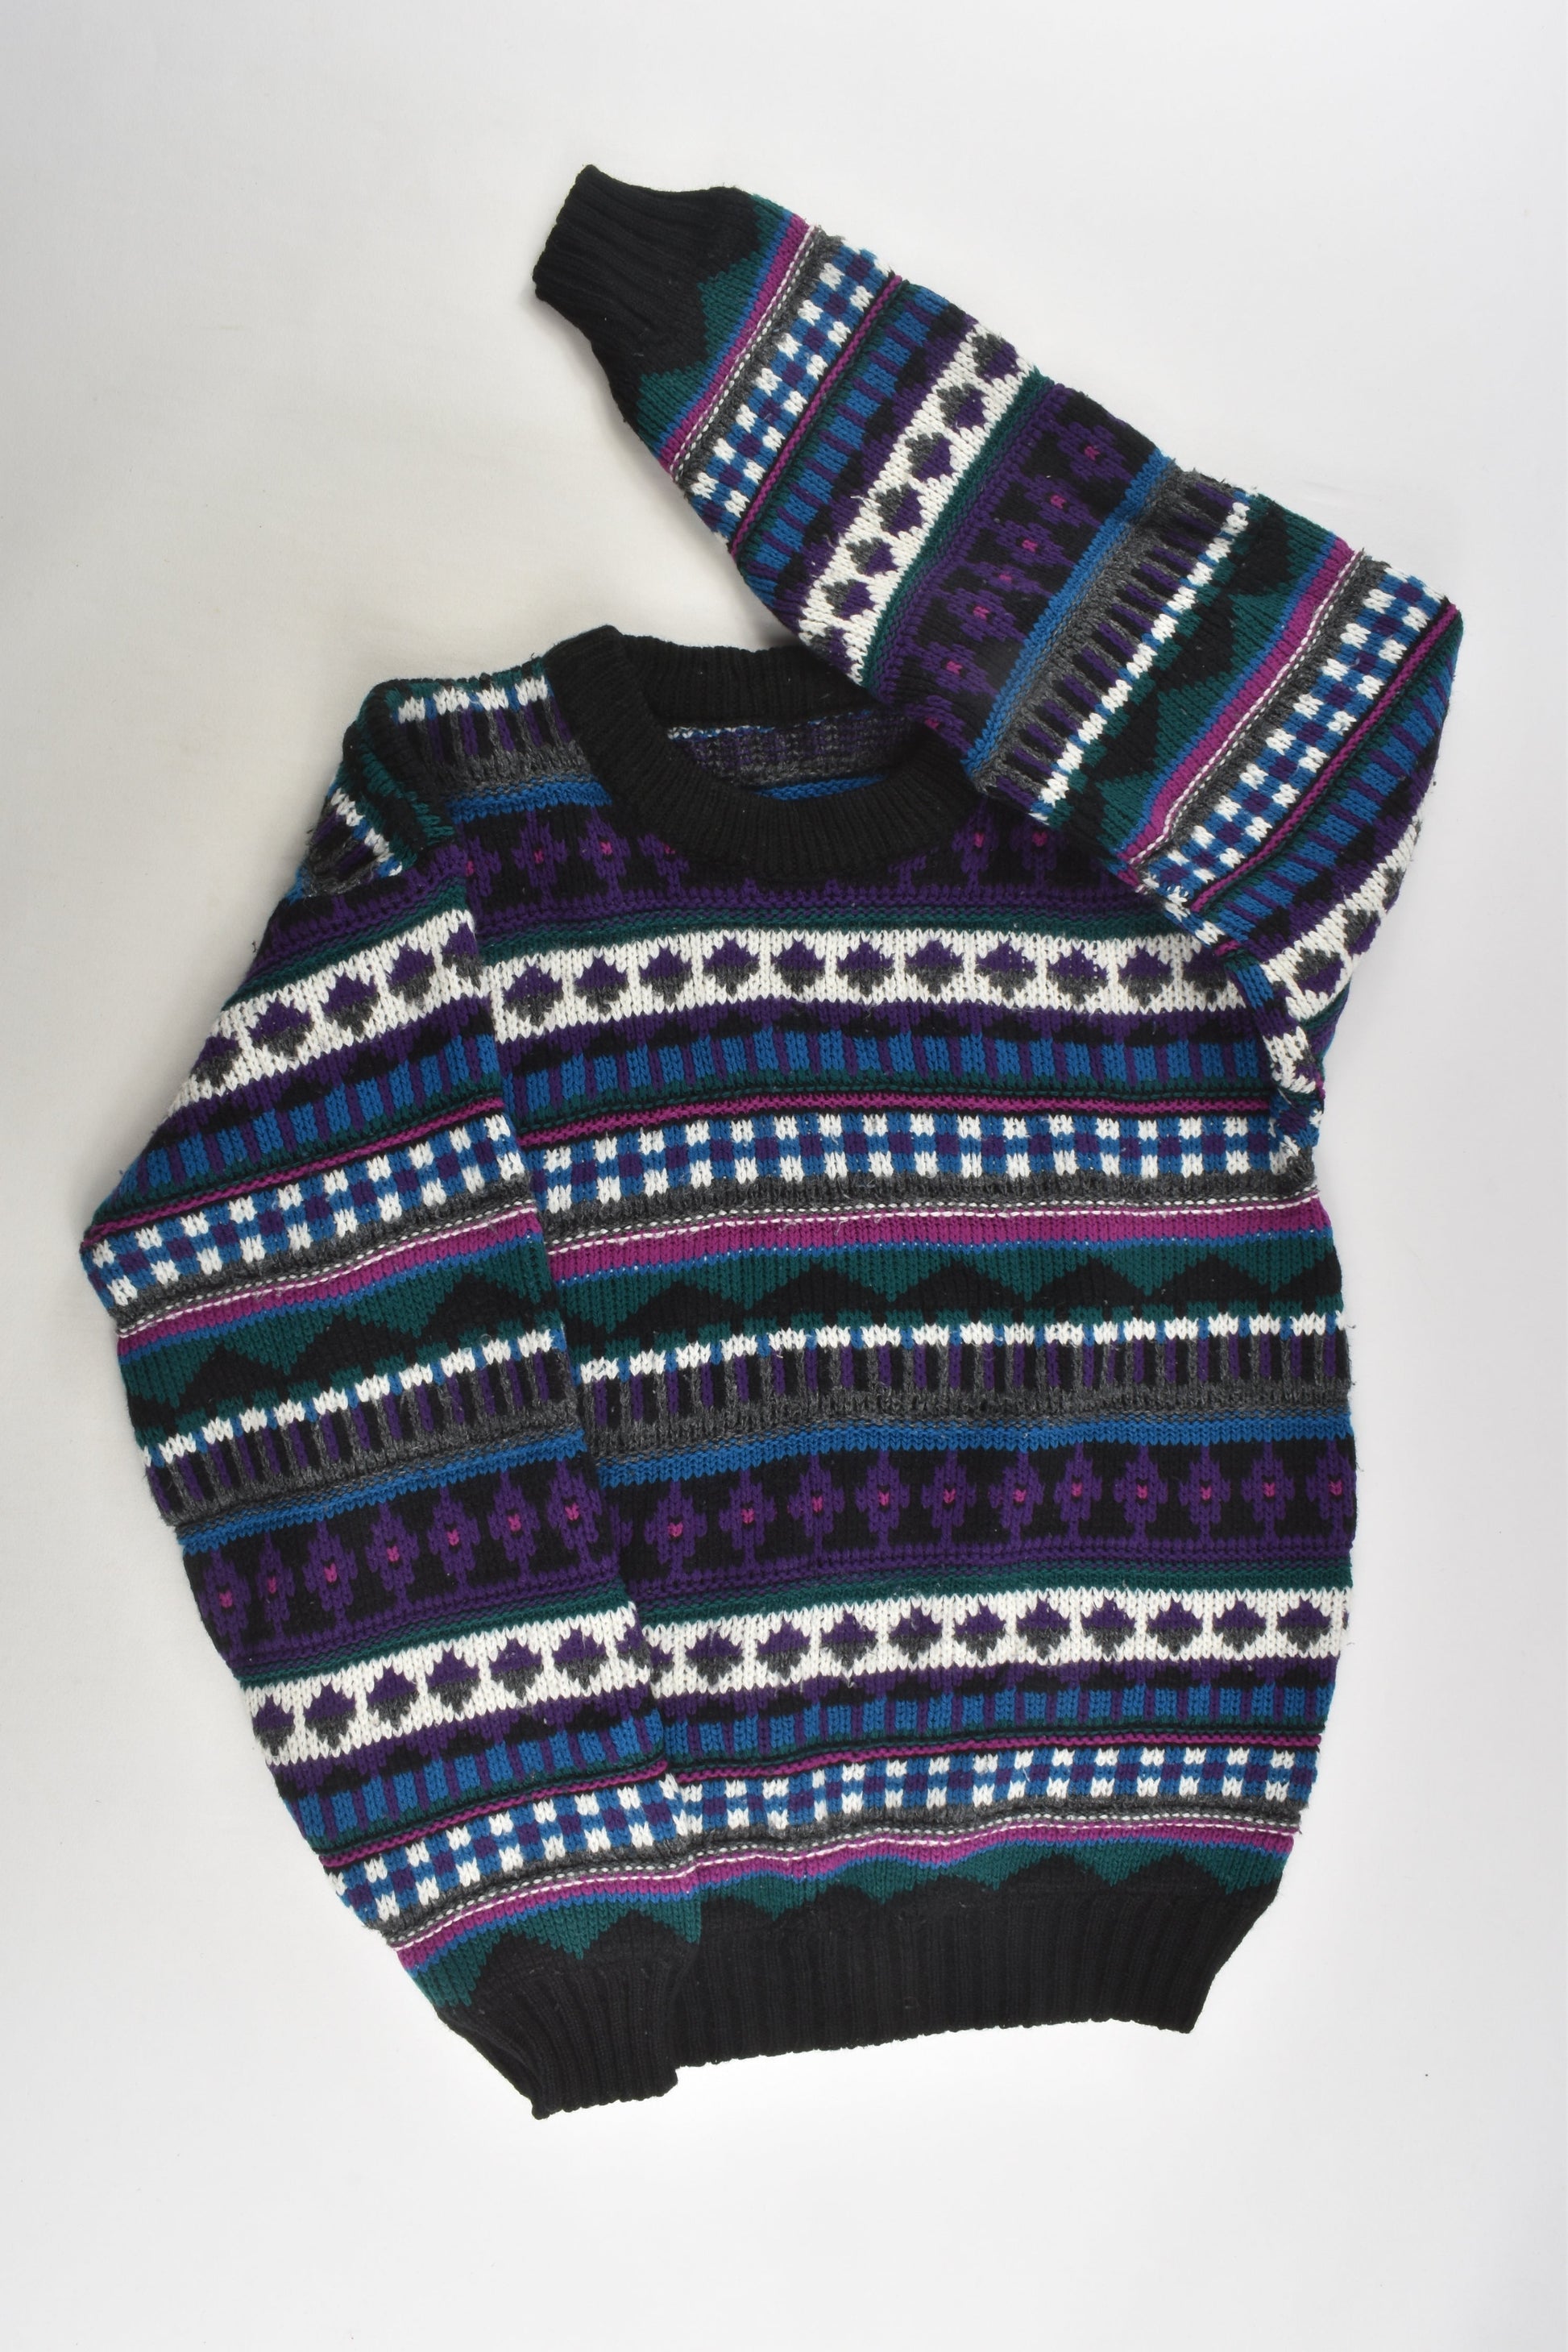 Brand Unknown Size approx 10 Knit Jumper